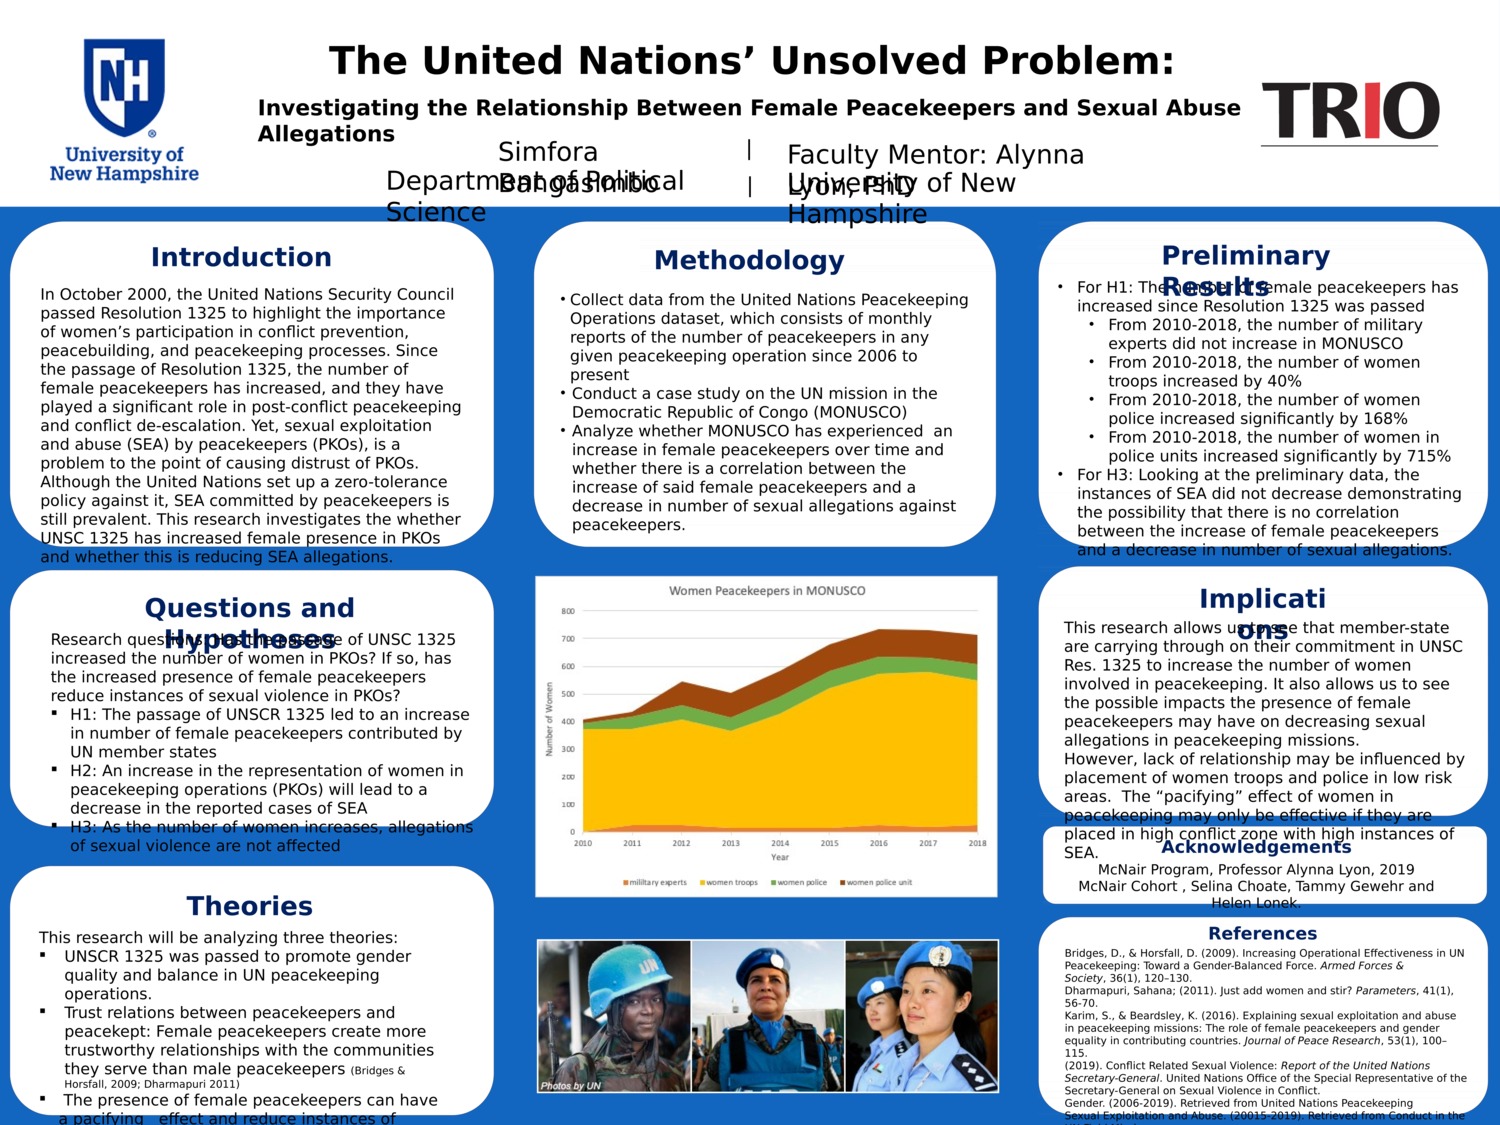 The United Nations’ Unsolved Problem: Investigating The Relationship Between Female Peacekeepers And Sexual Abuse Allegations by sdb1014